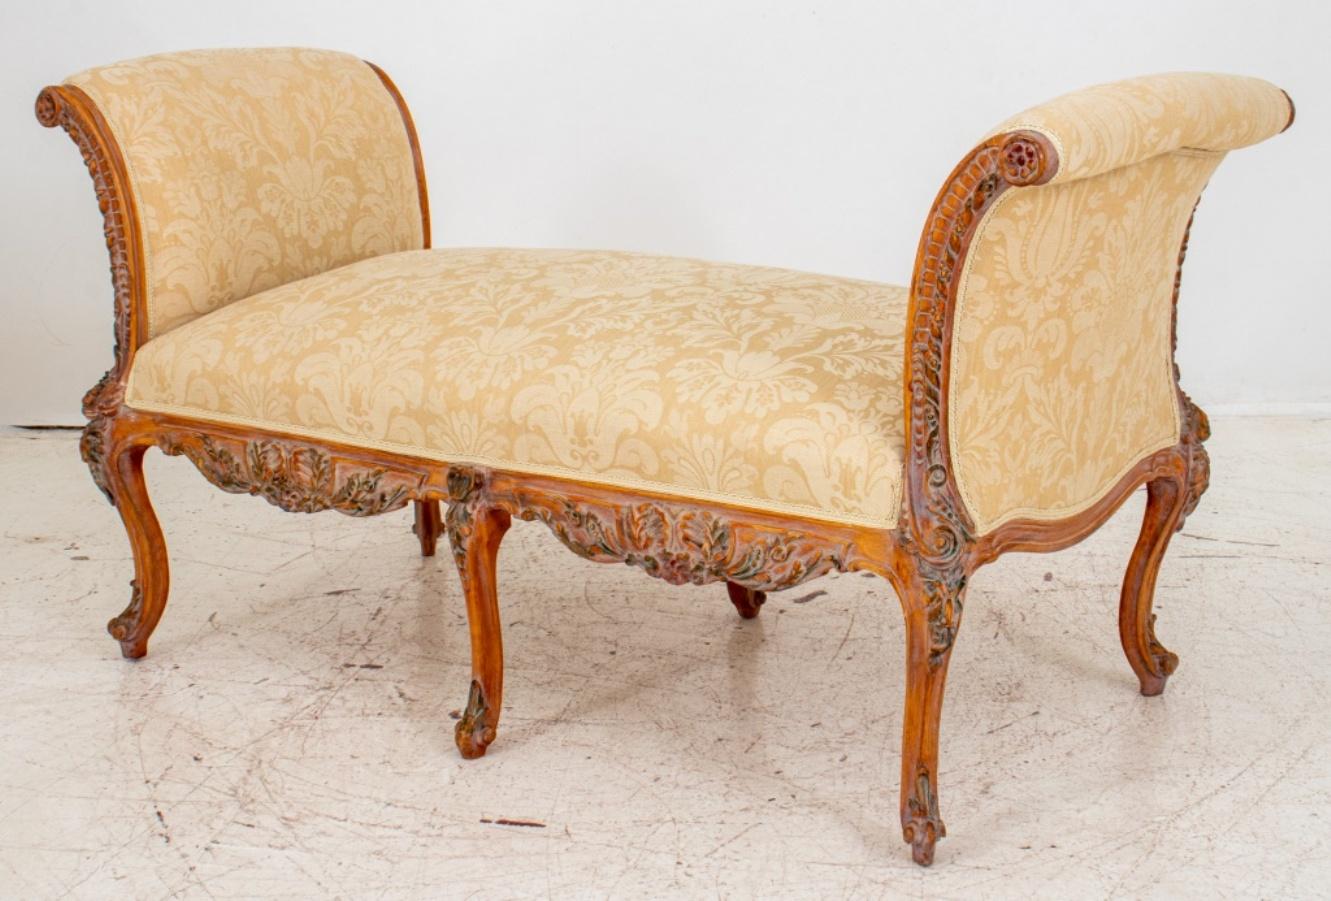 Italian Baroque Revival cerused wood bench carved with floral motifs and upholstered with beige damask fabric, raised on cabriole legs. 32